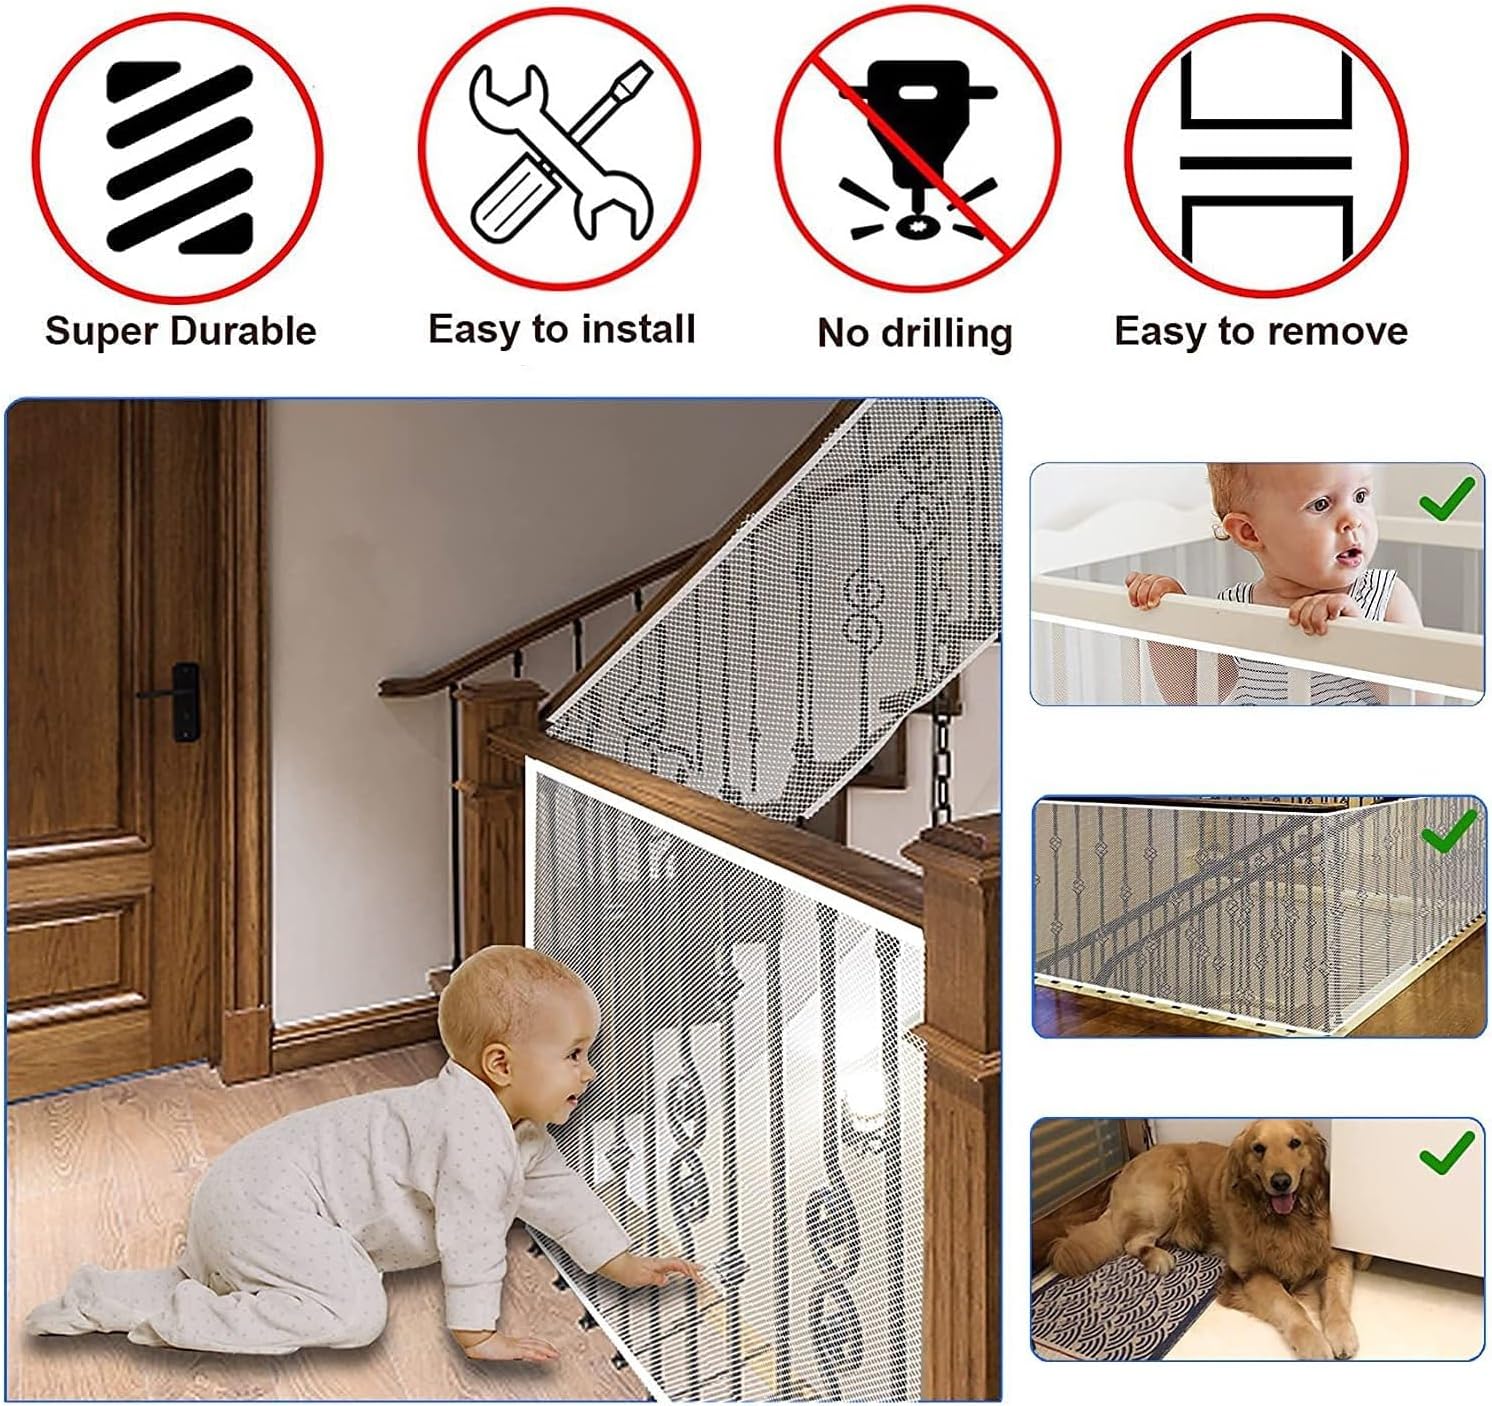 MarlaMall Baby Safety Stair Railing Net, 10ft L x 2.5ft H Stairway Net, Child Proofing Banister Guard Net for Indoor Outdoor